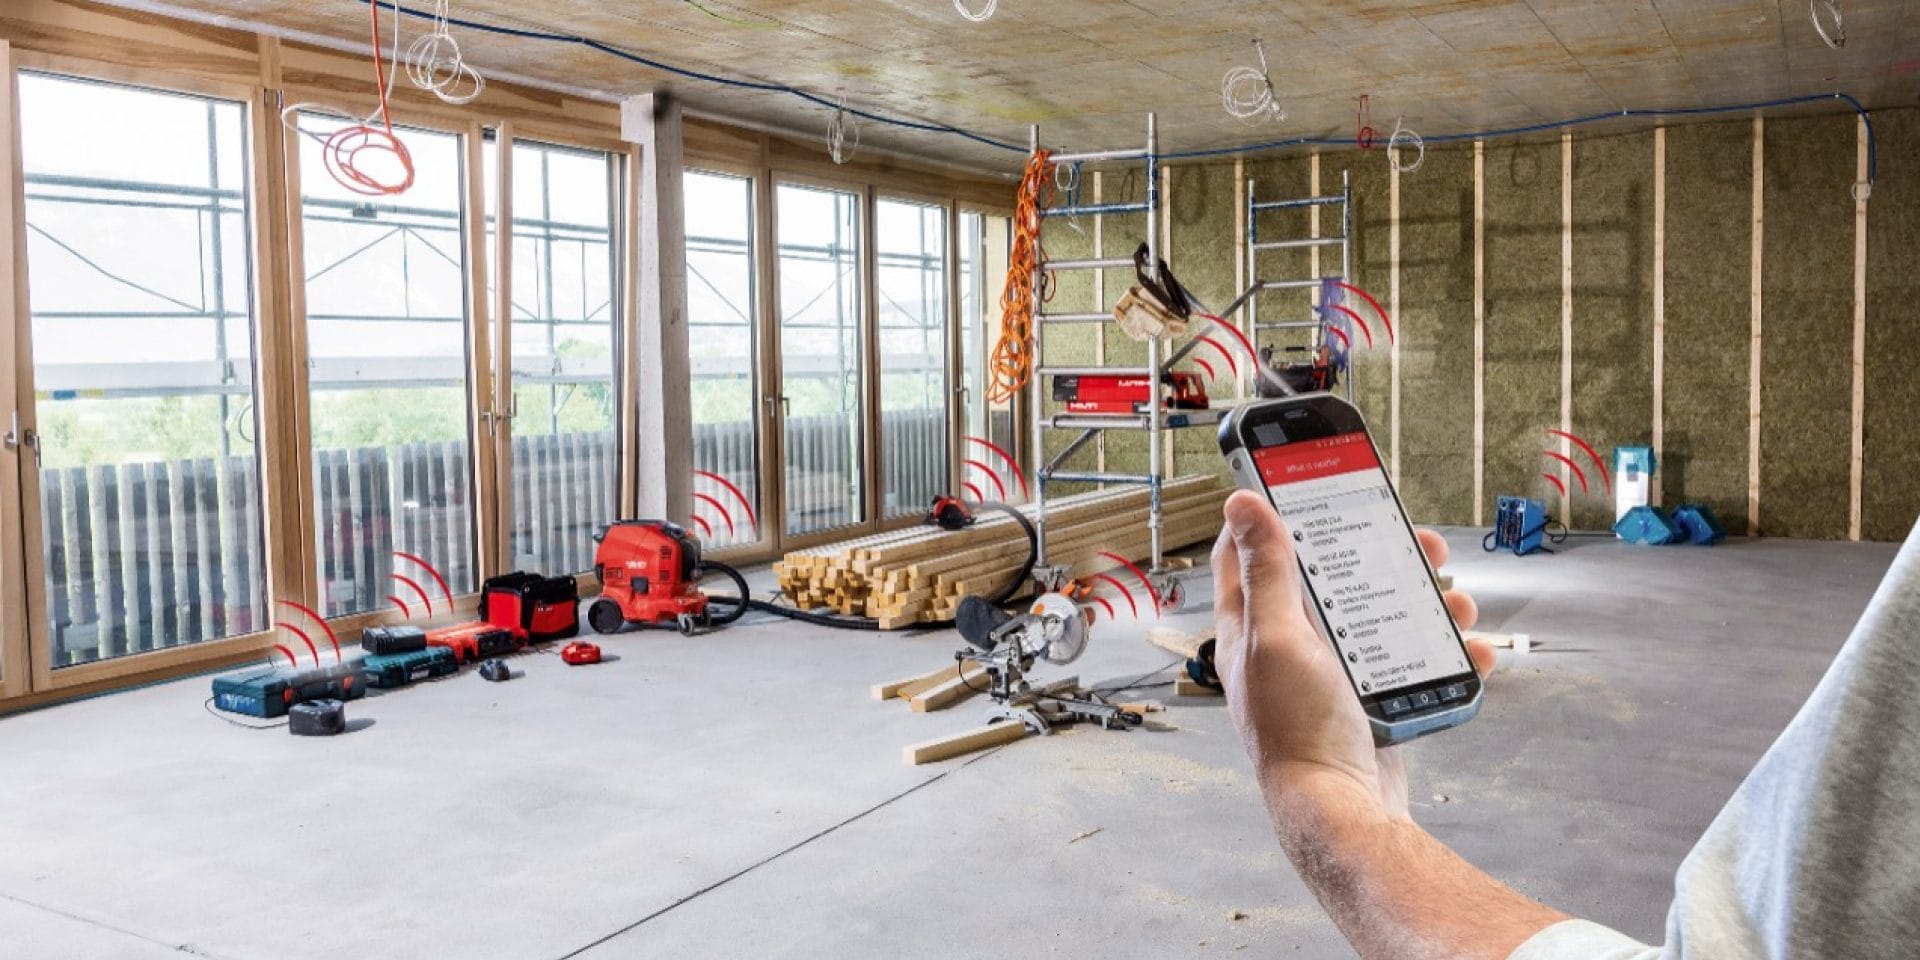 With the introduction of Active Tracking with Bluetooth technology, Hilti’s ON!Track asset management system is set to bring major new savings and efficiencies to the construction industry.